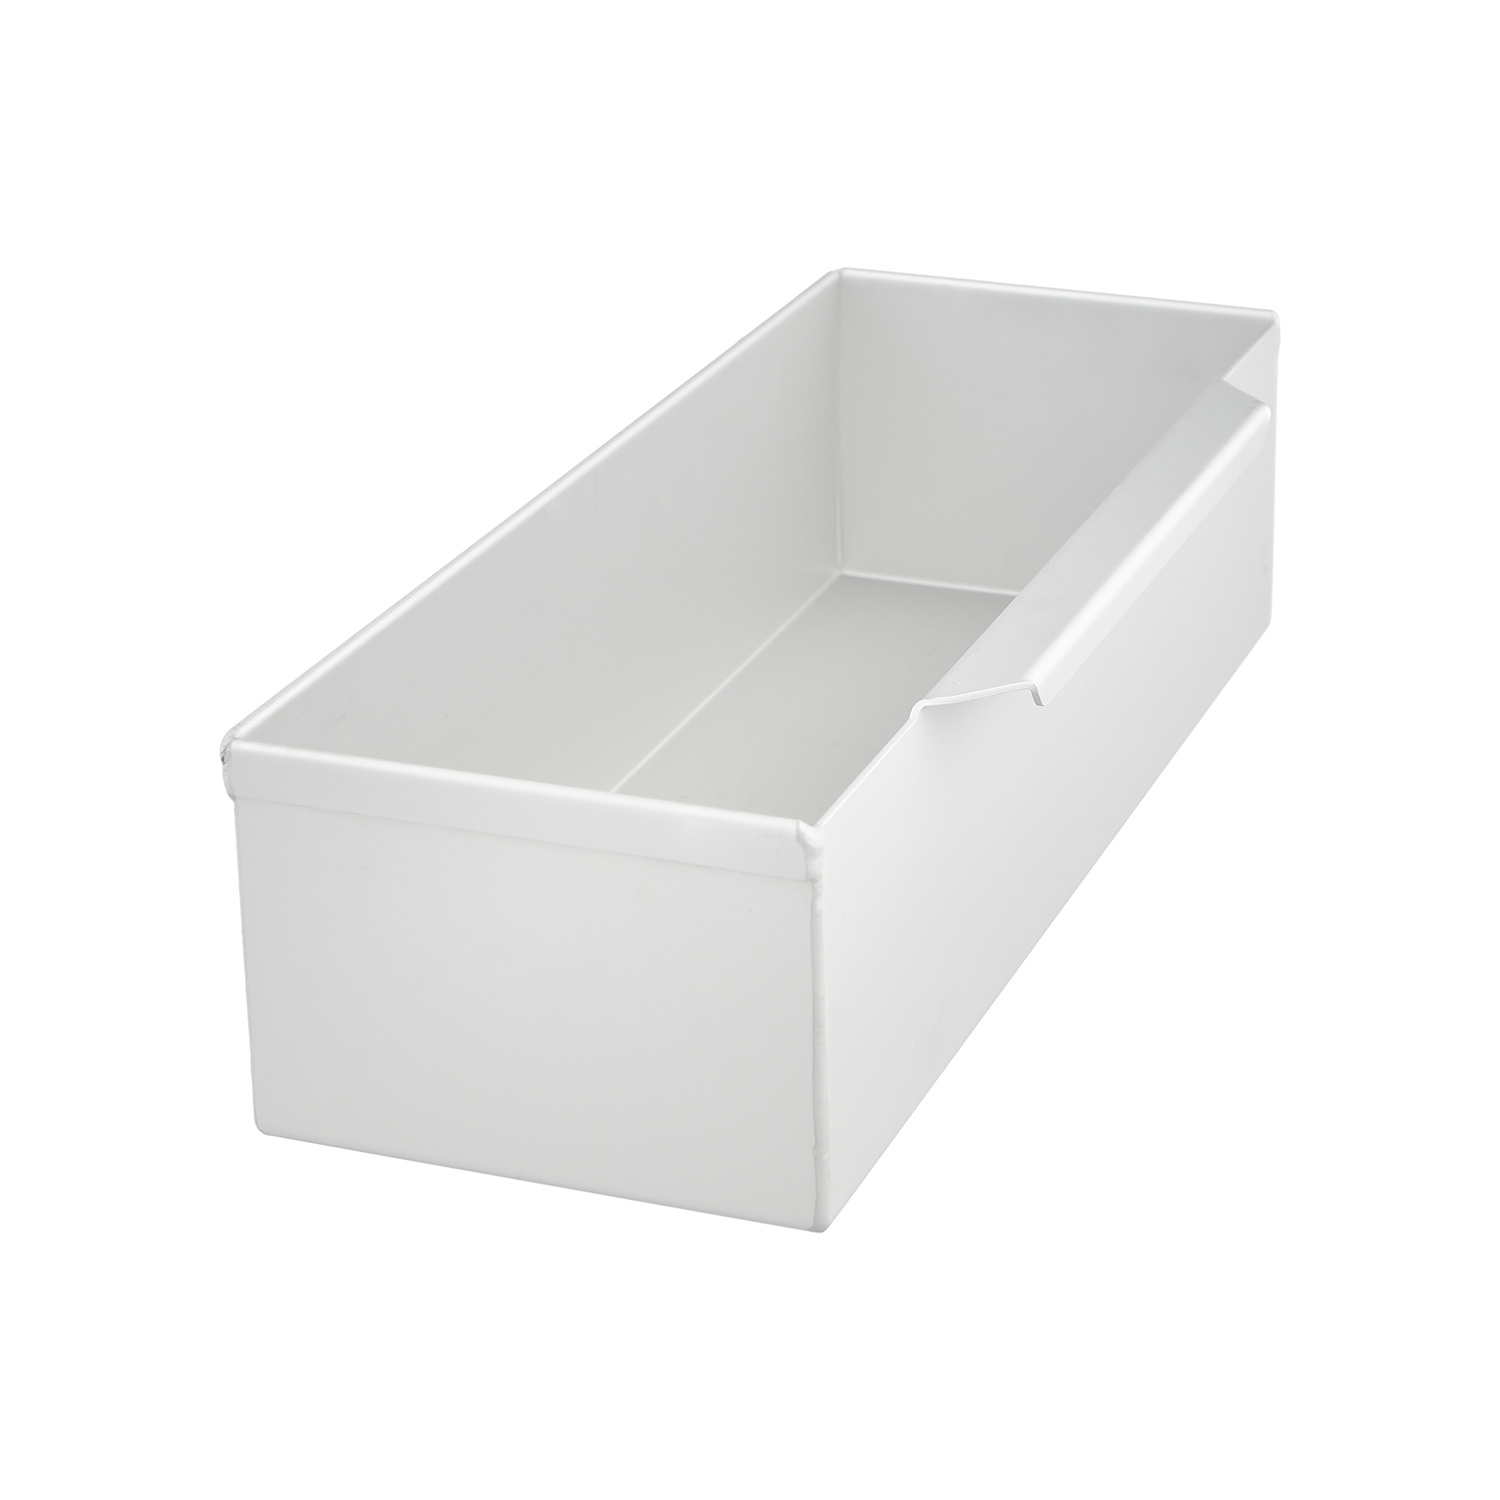 Sidebox for Airline Trolleys 30.5 x 11.0 x 8.0 cm